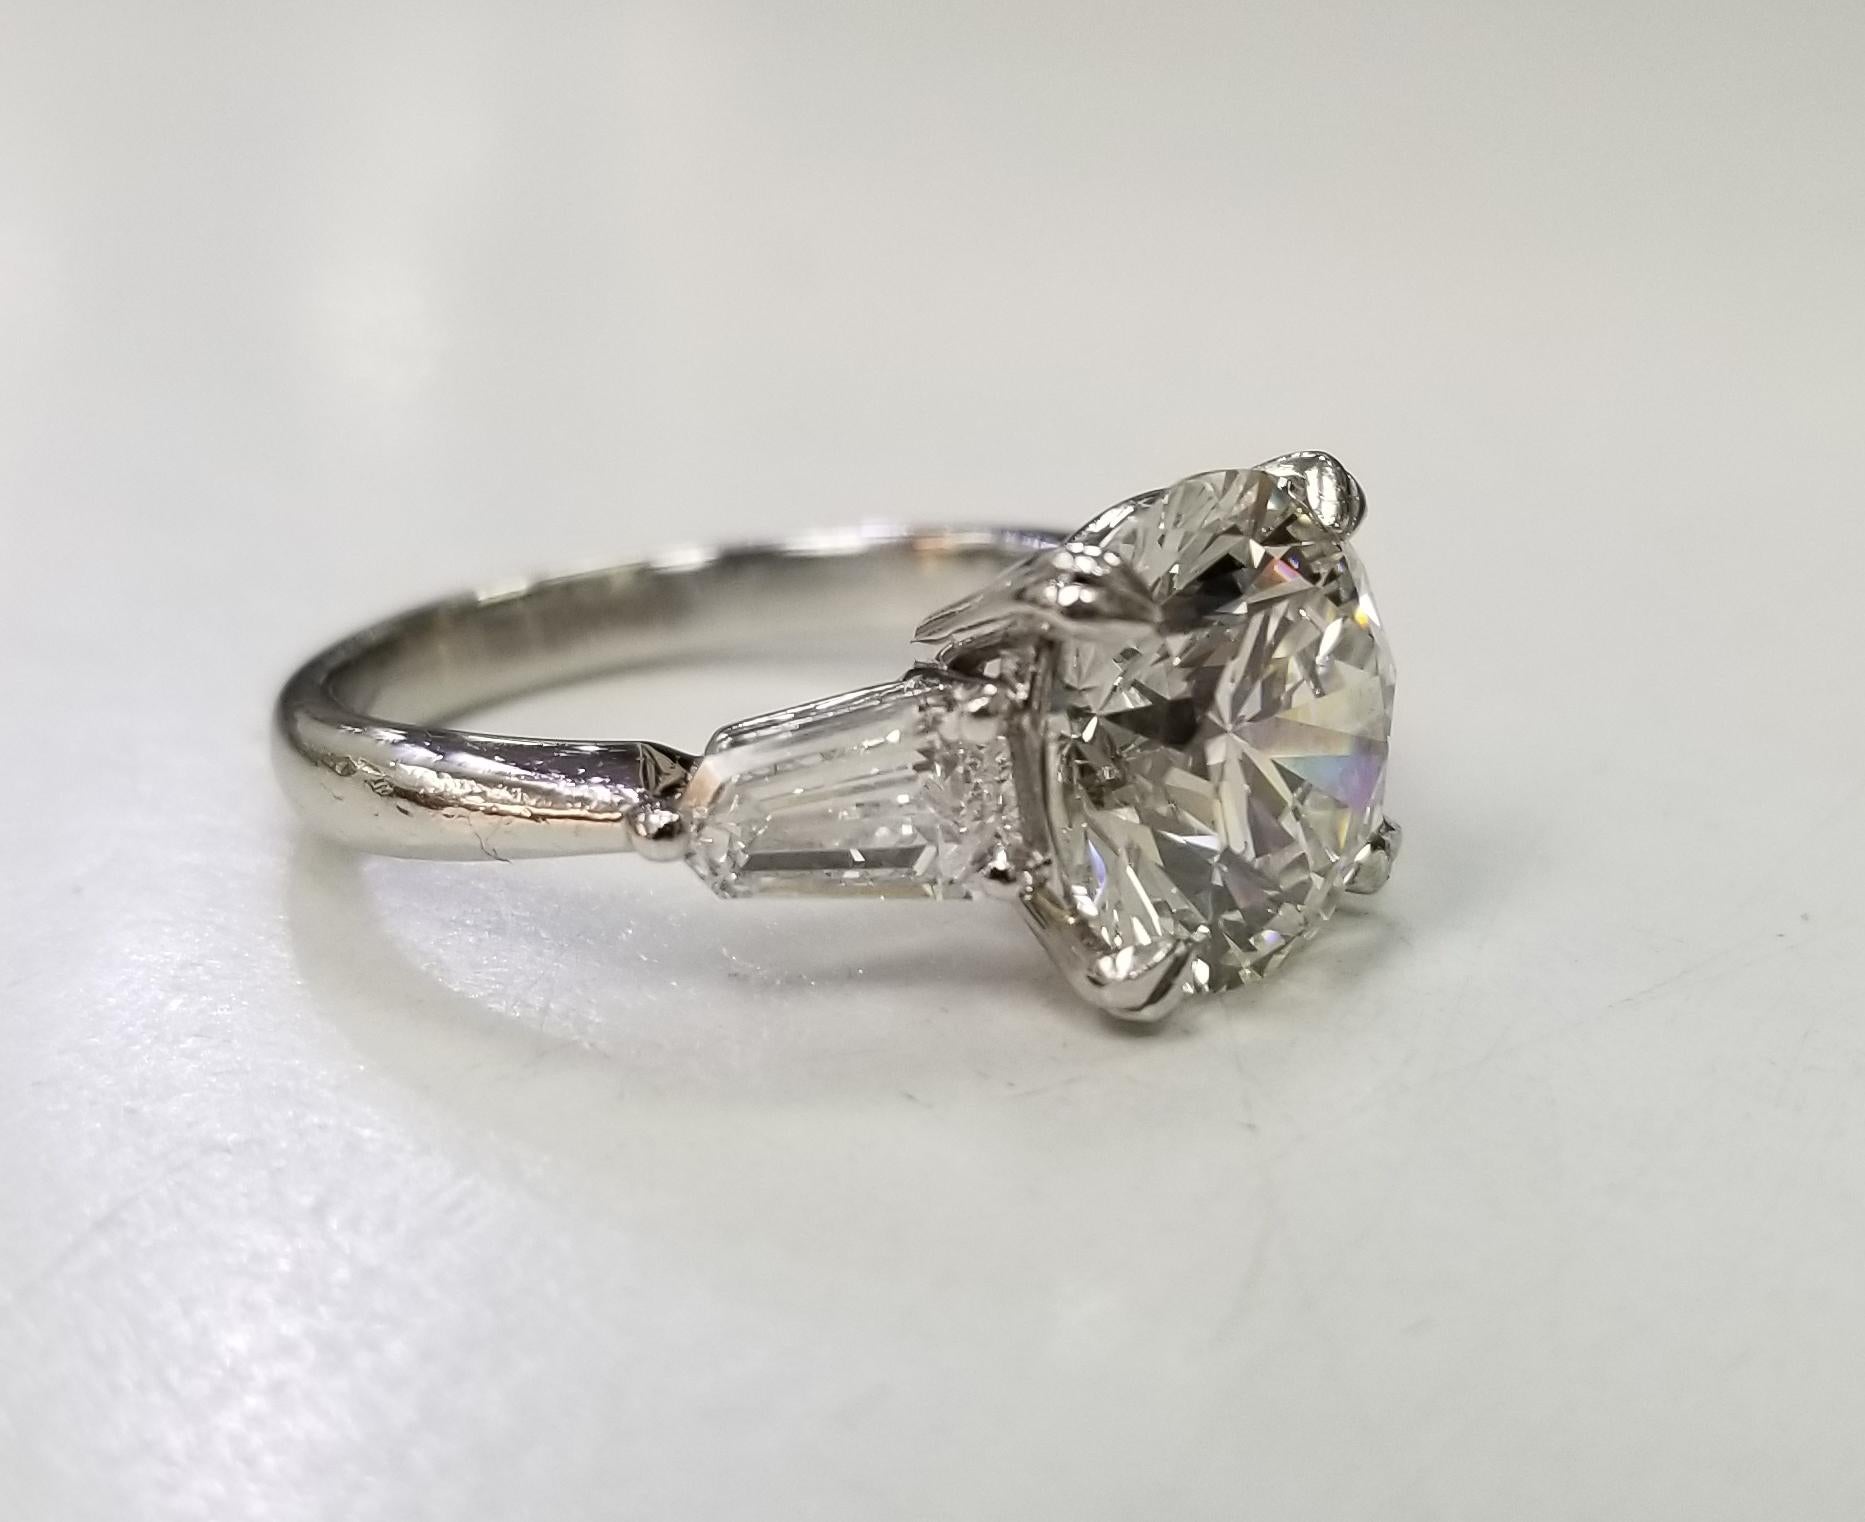  *Motivated to Sell – Please make a Fair Offer*
This ring was appraised for $180,000 in April of 2013
Specifications:
    main stone: GIA Certified Brilliant Cut 4.07 CARAT (GIA #1142622513)
    DIAMONDS: 2 Tapered Baguettes  1.09cts. Color E-F VS
 